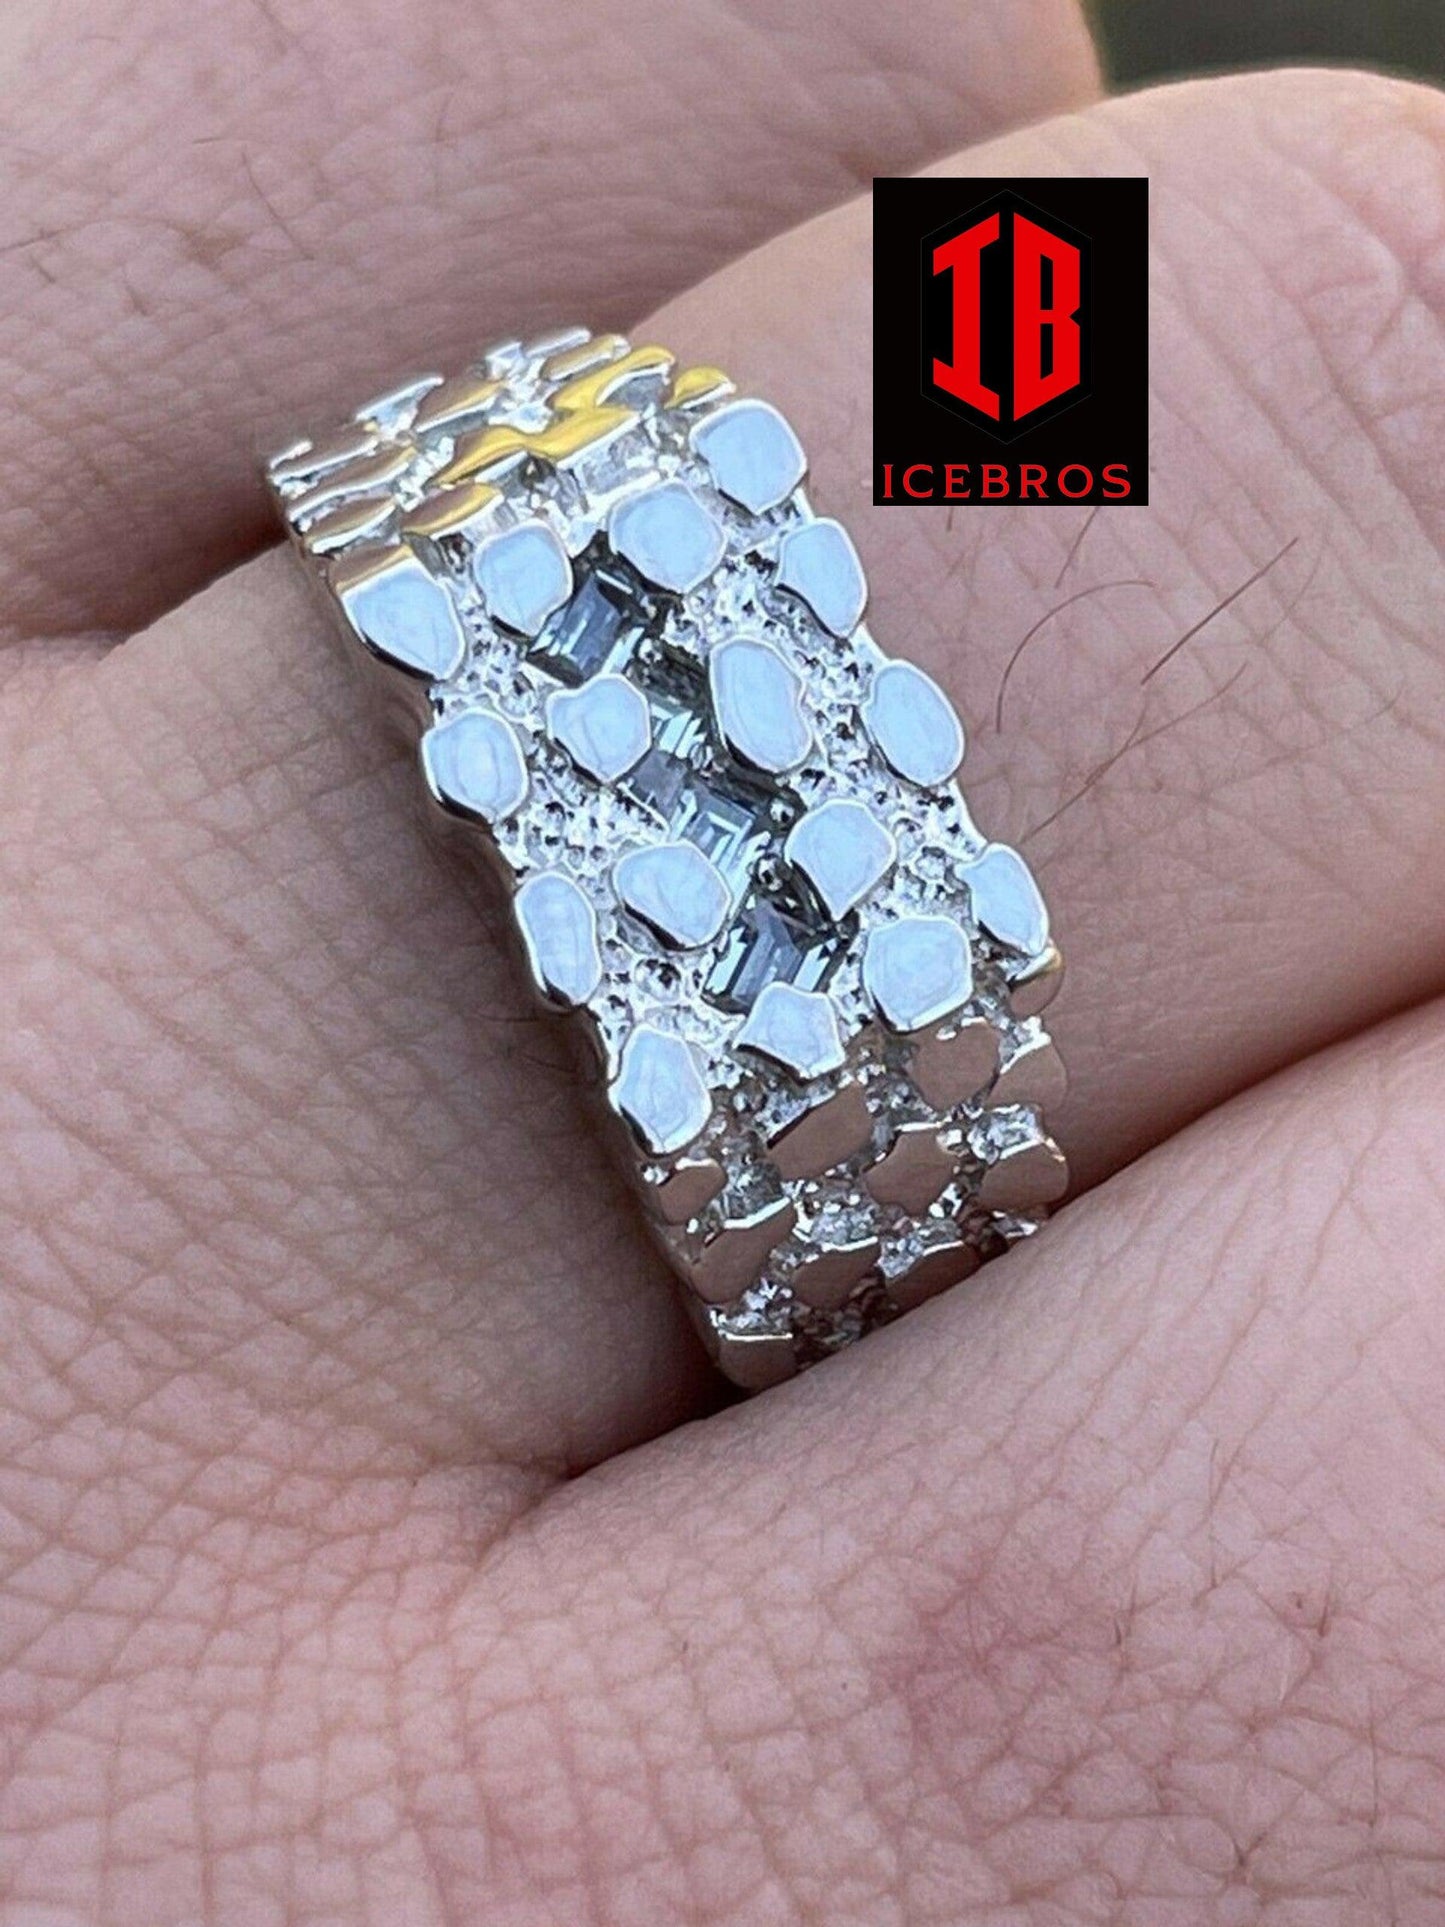 14k Gold Over REAL Solid 925 Sterling Silver Nugget Ring Iced Baguette Diamonds (CZ)